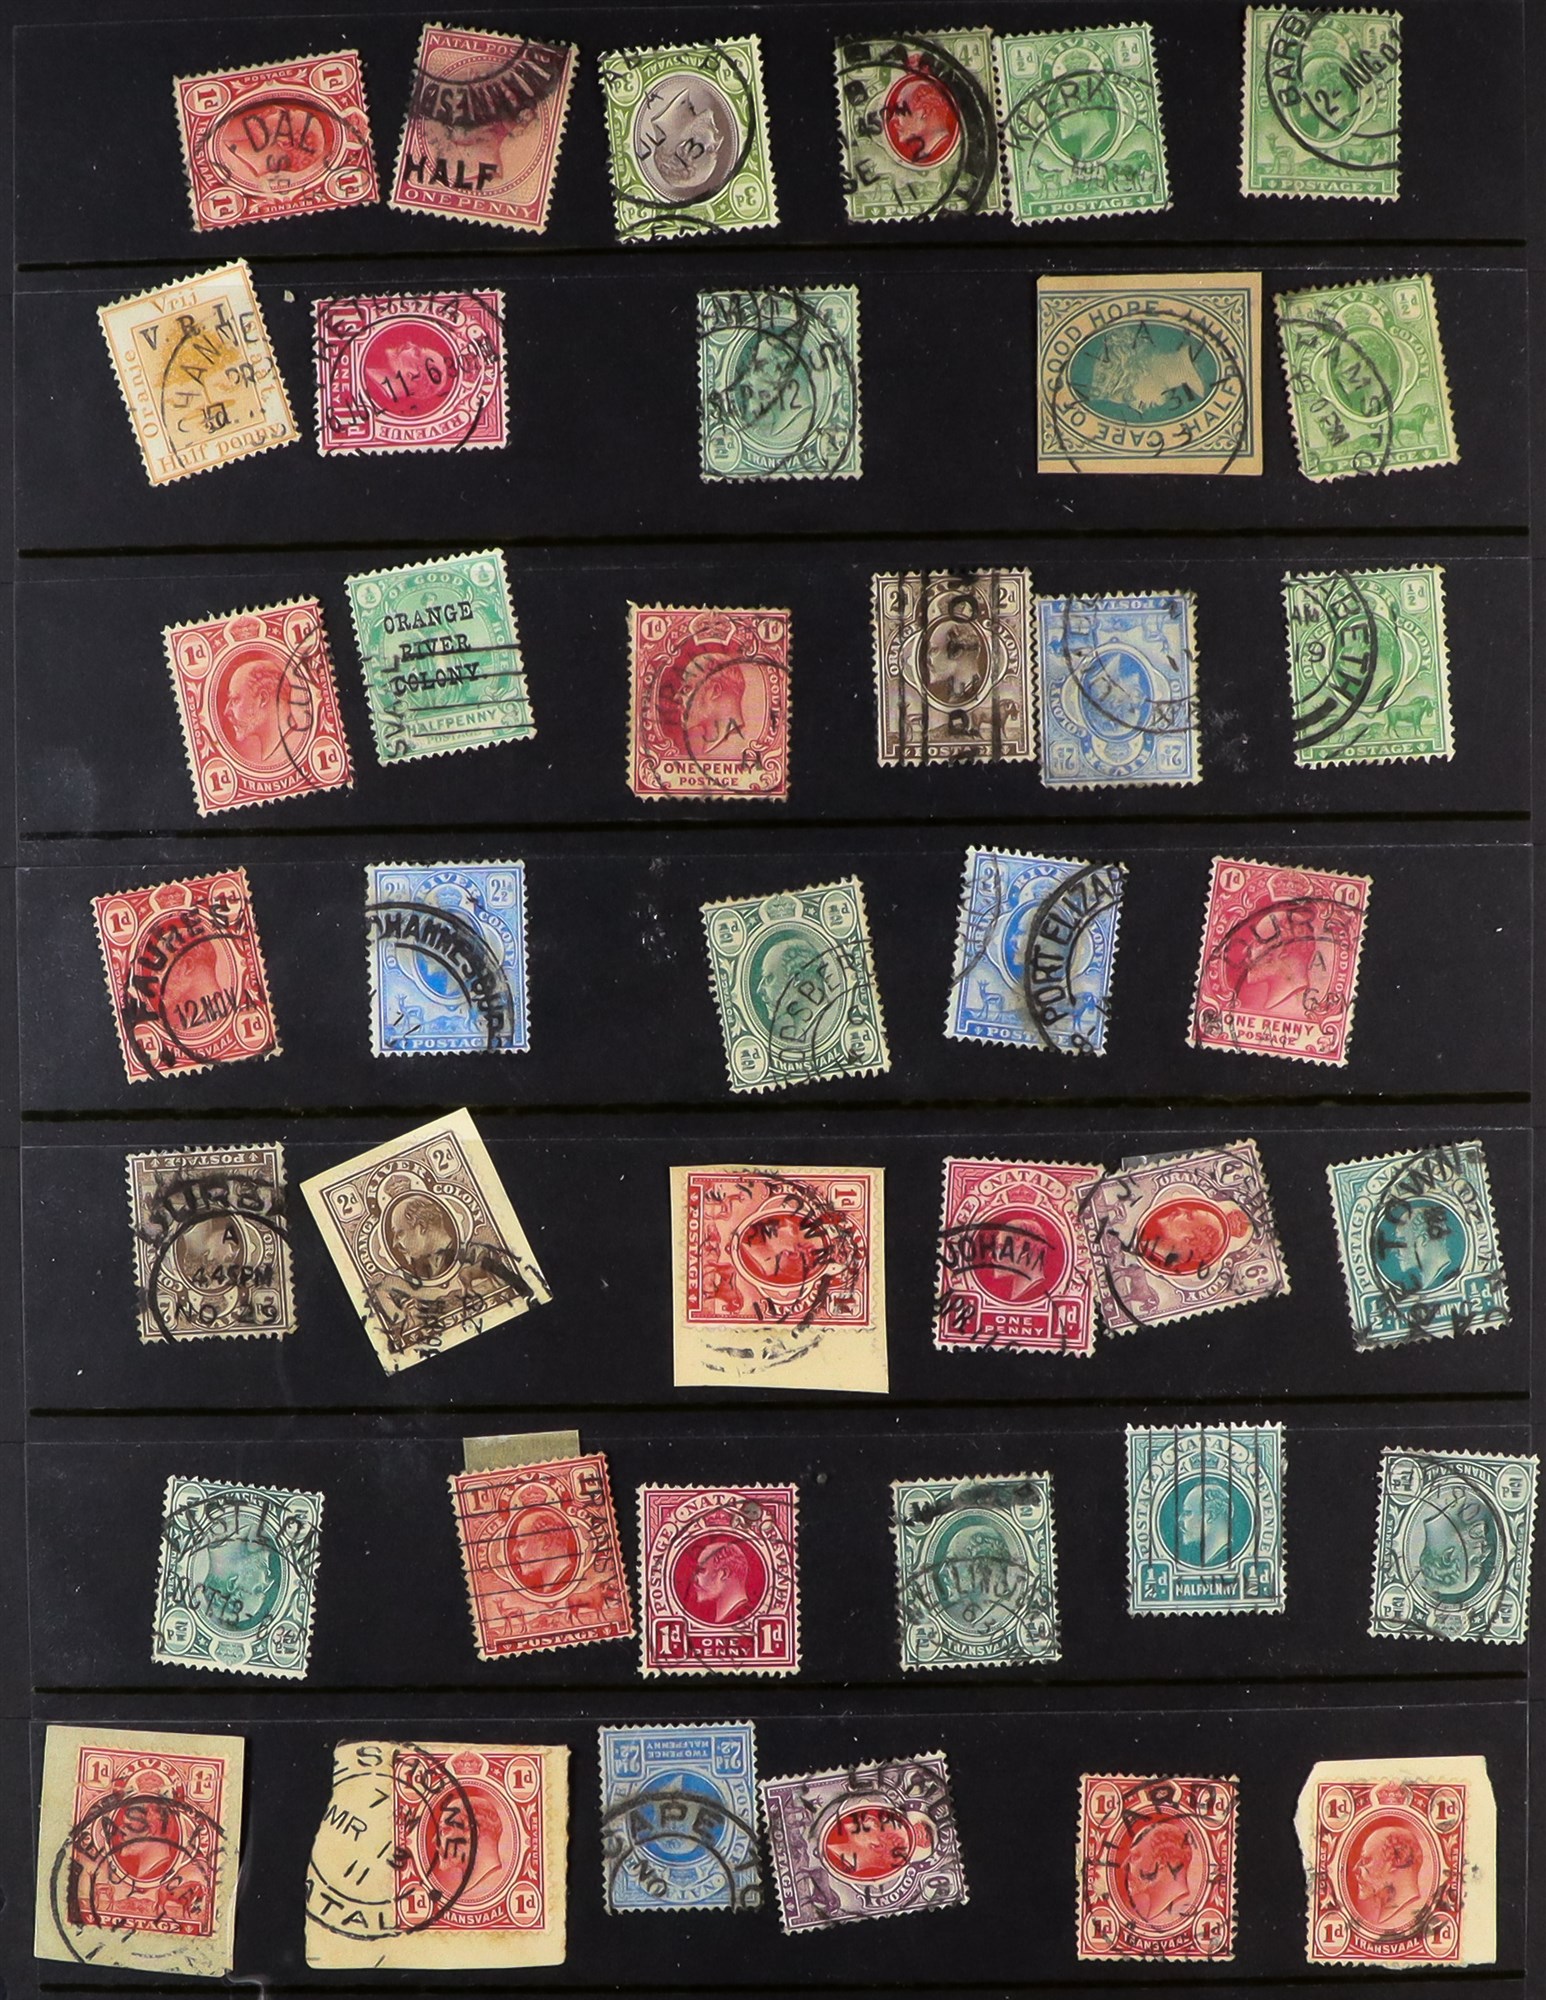 SOUTH AFRICA -COLS & REPS INTER-PROVINCIAL USE a collection of stamps from the various former